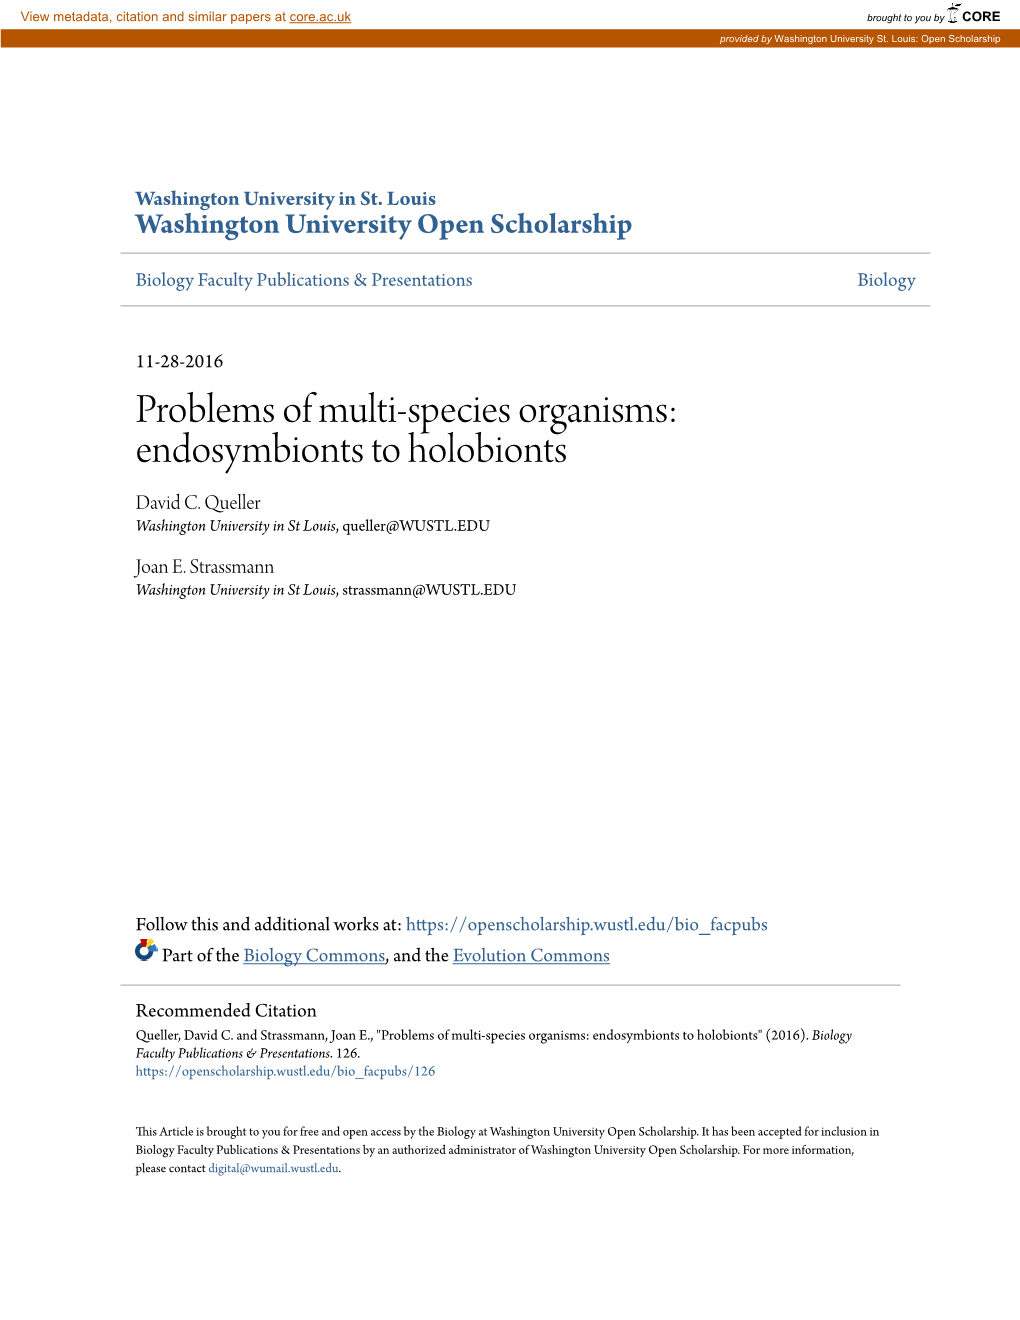 Problems of Multi-Species Organisms: Endosymbionts to Holobionts David C